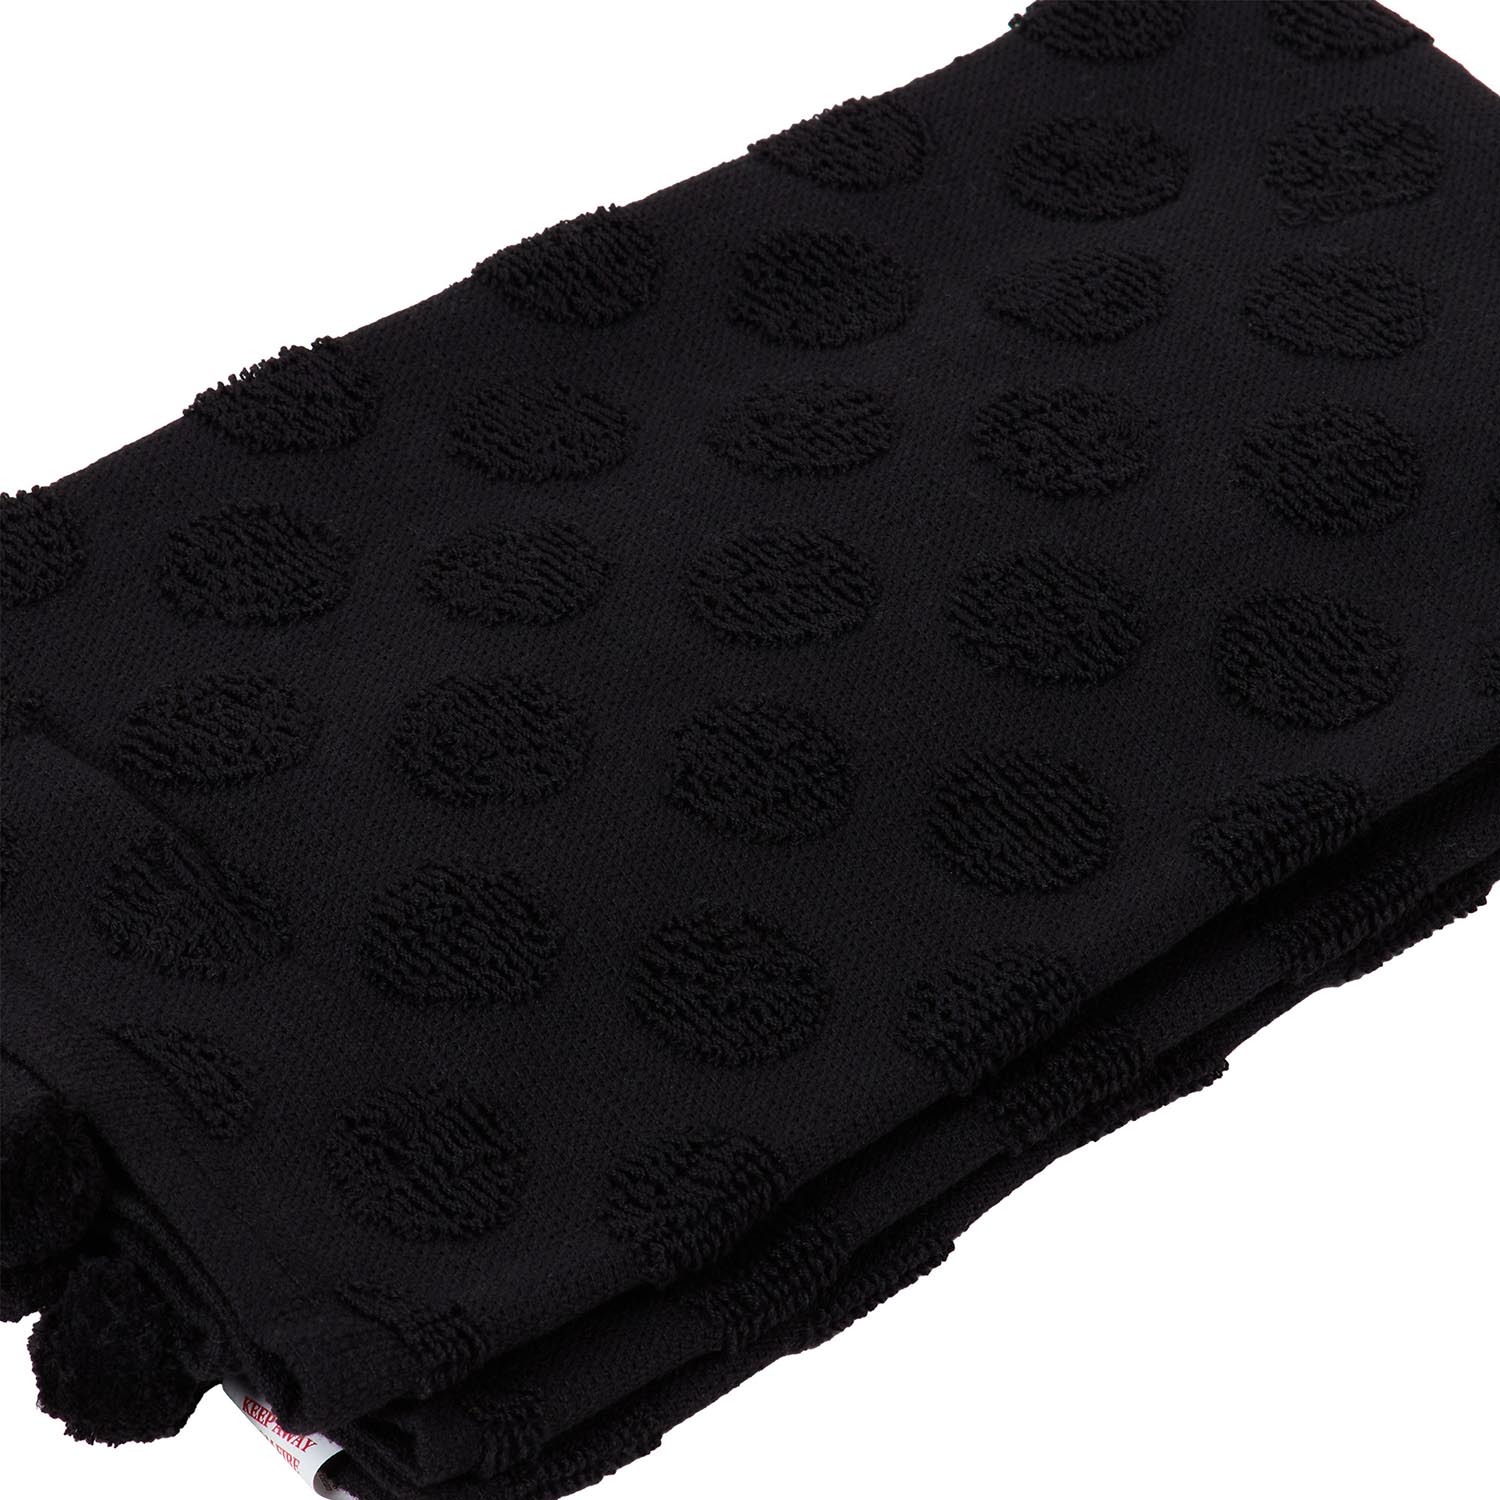 Pack of 2 Dobby Terry Kitchen Towels with Pom Poms - Black Image 6